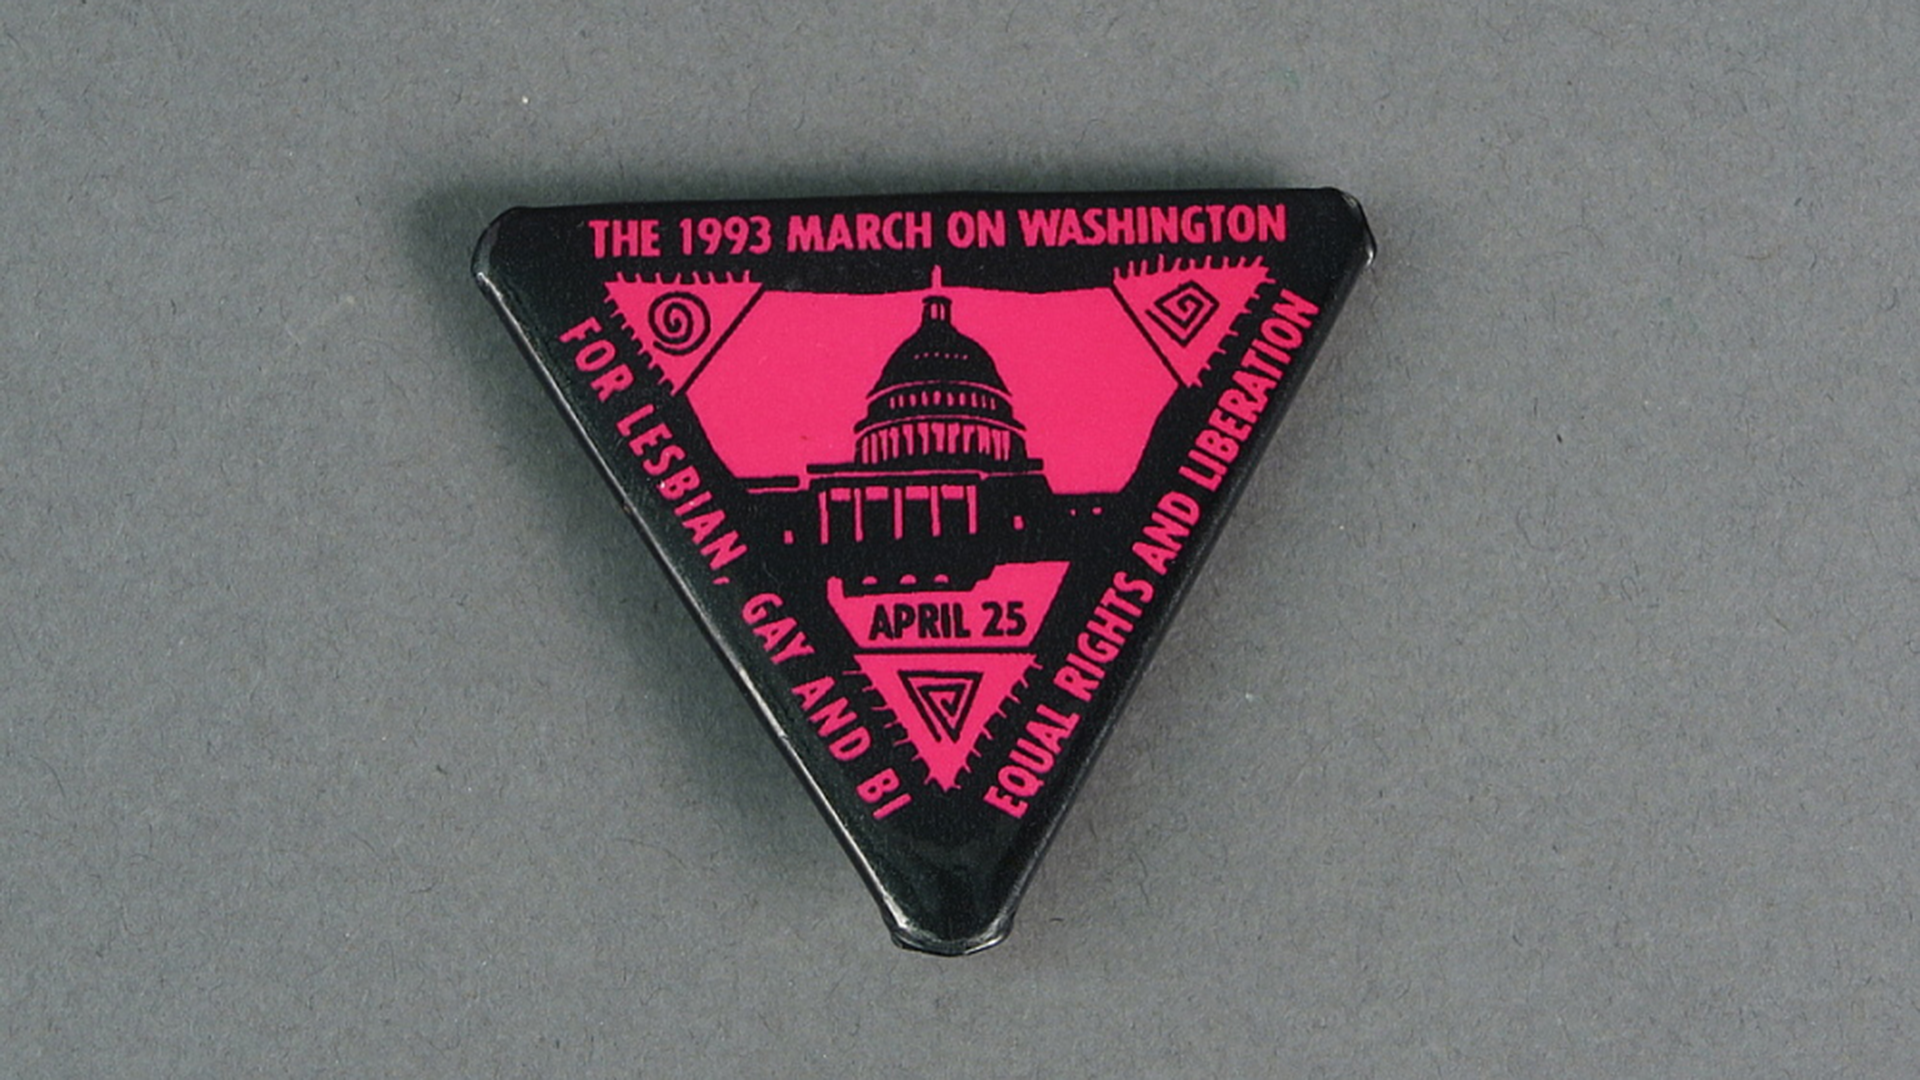 A black and pink pin in the shape of a triangle commemorates the on Washington for Lesbian, Gay, and Bi Equal Rights and Liberation which took place April 25, 1993.